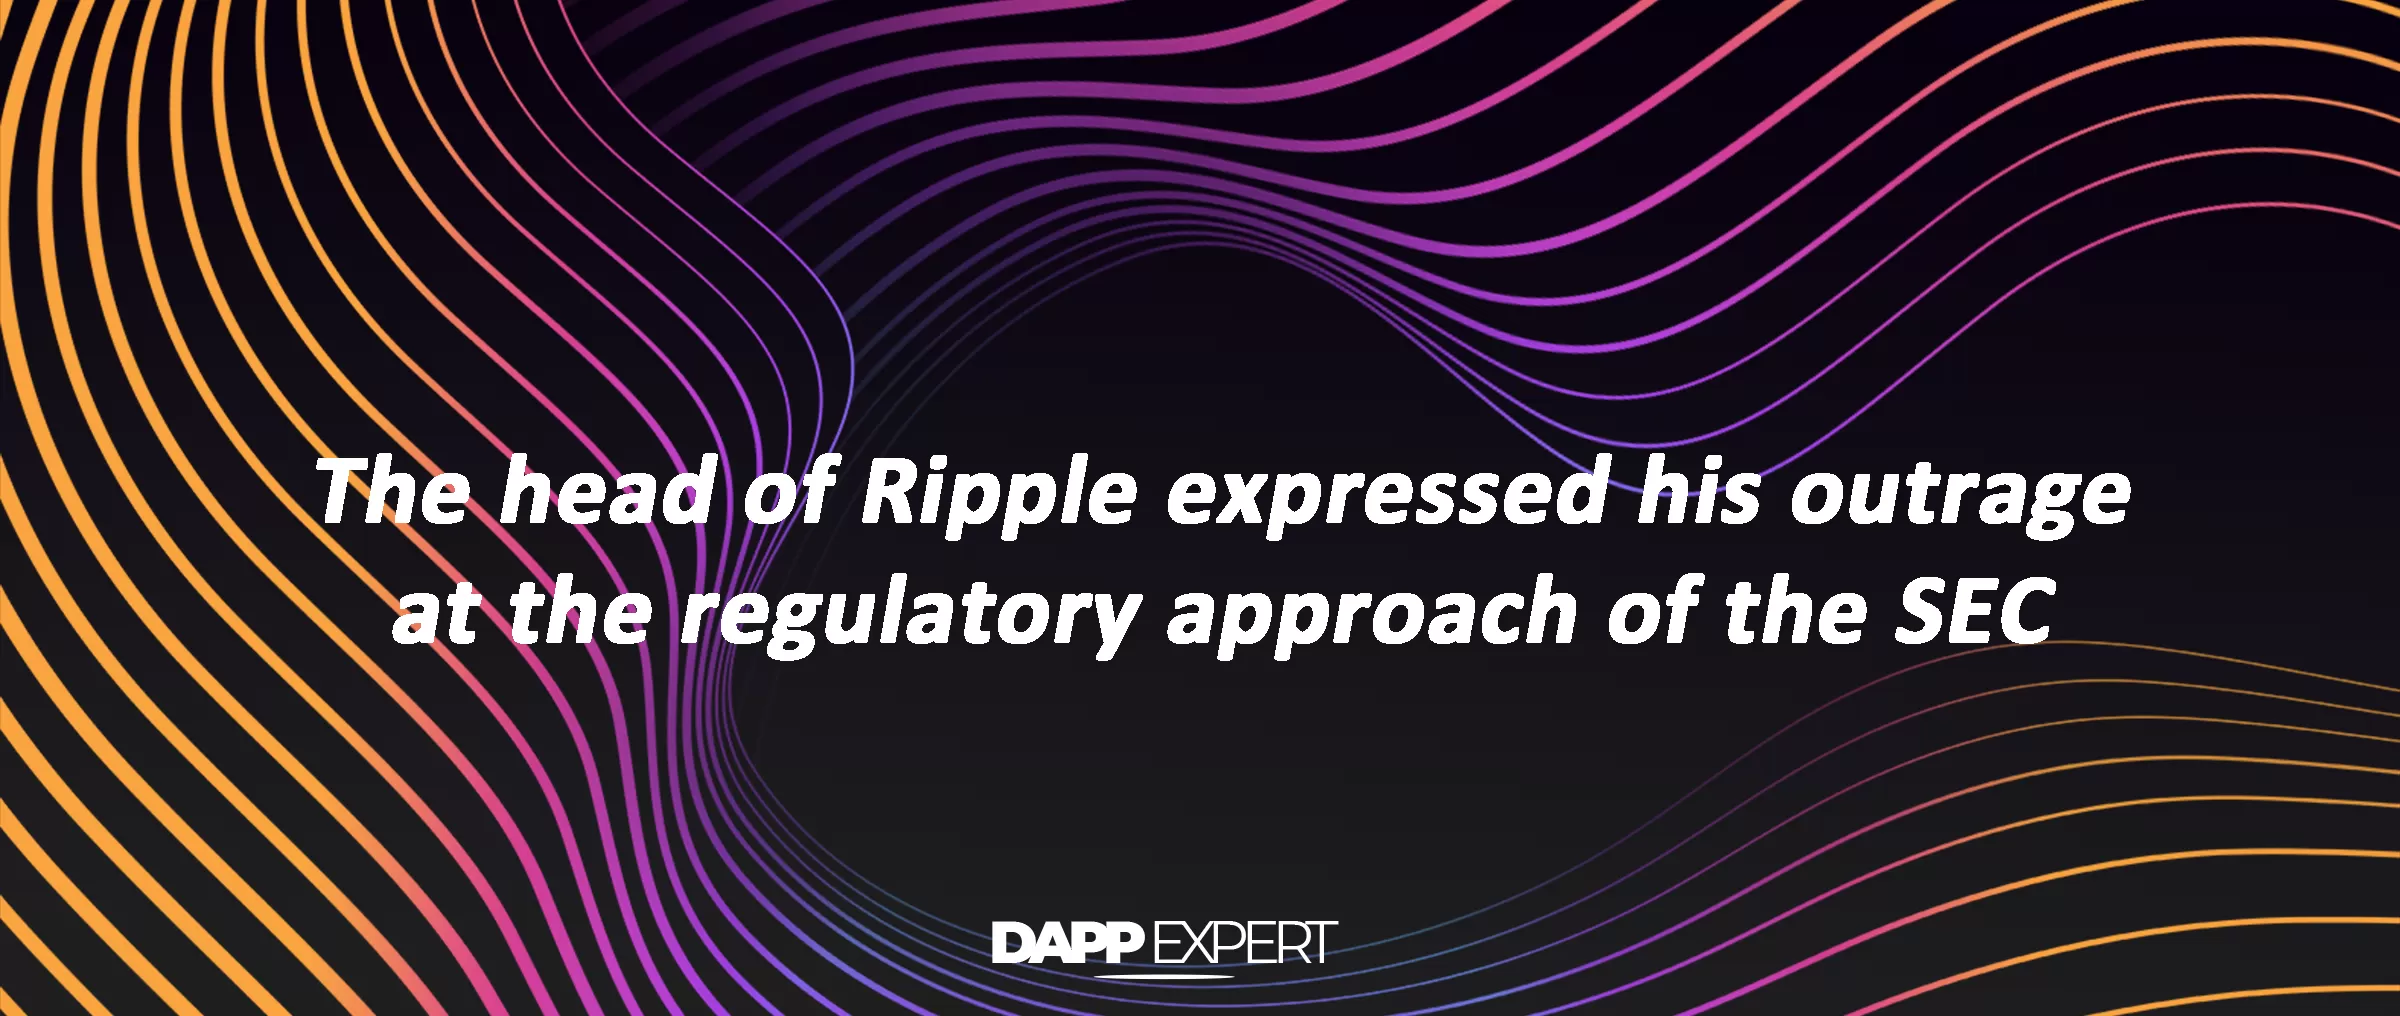 The head of Ripple expressed his outrage at the regulatory approach of the SEC